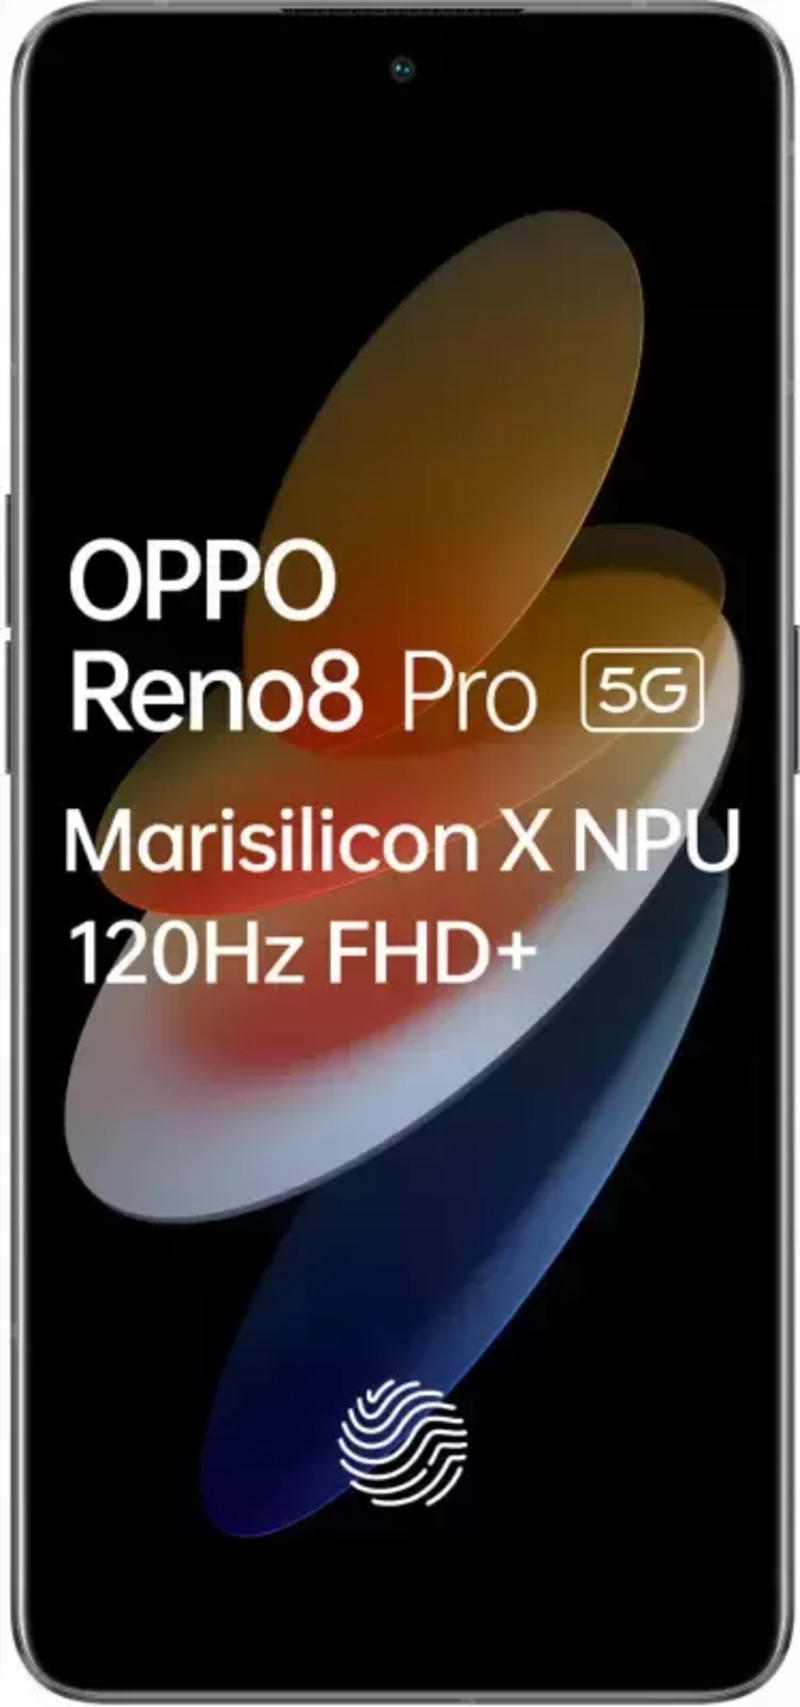 Oppo Reno 8 Pro Expected Price Full Specs Release Date 13th Oct 21 At Gadgets Now